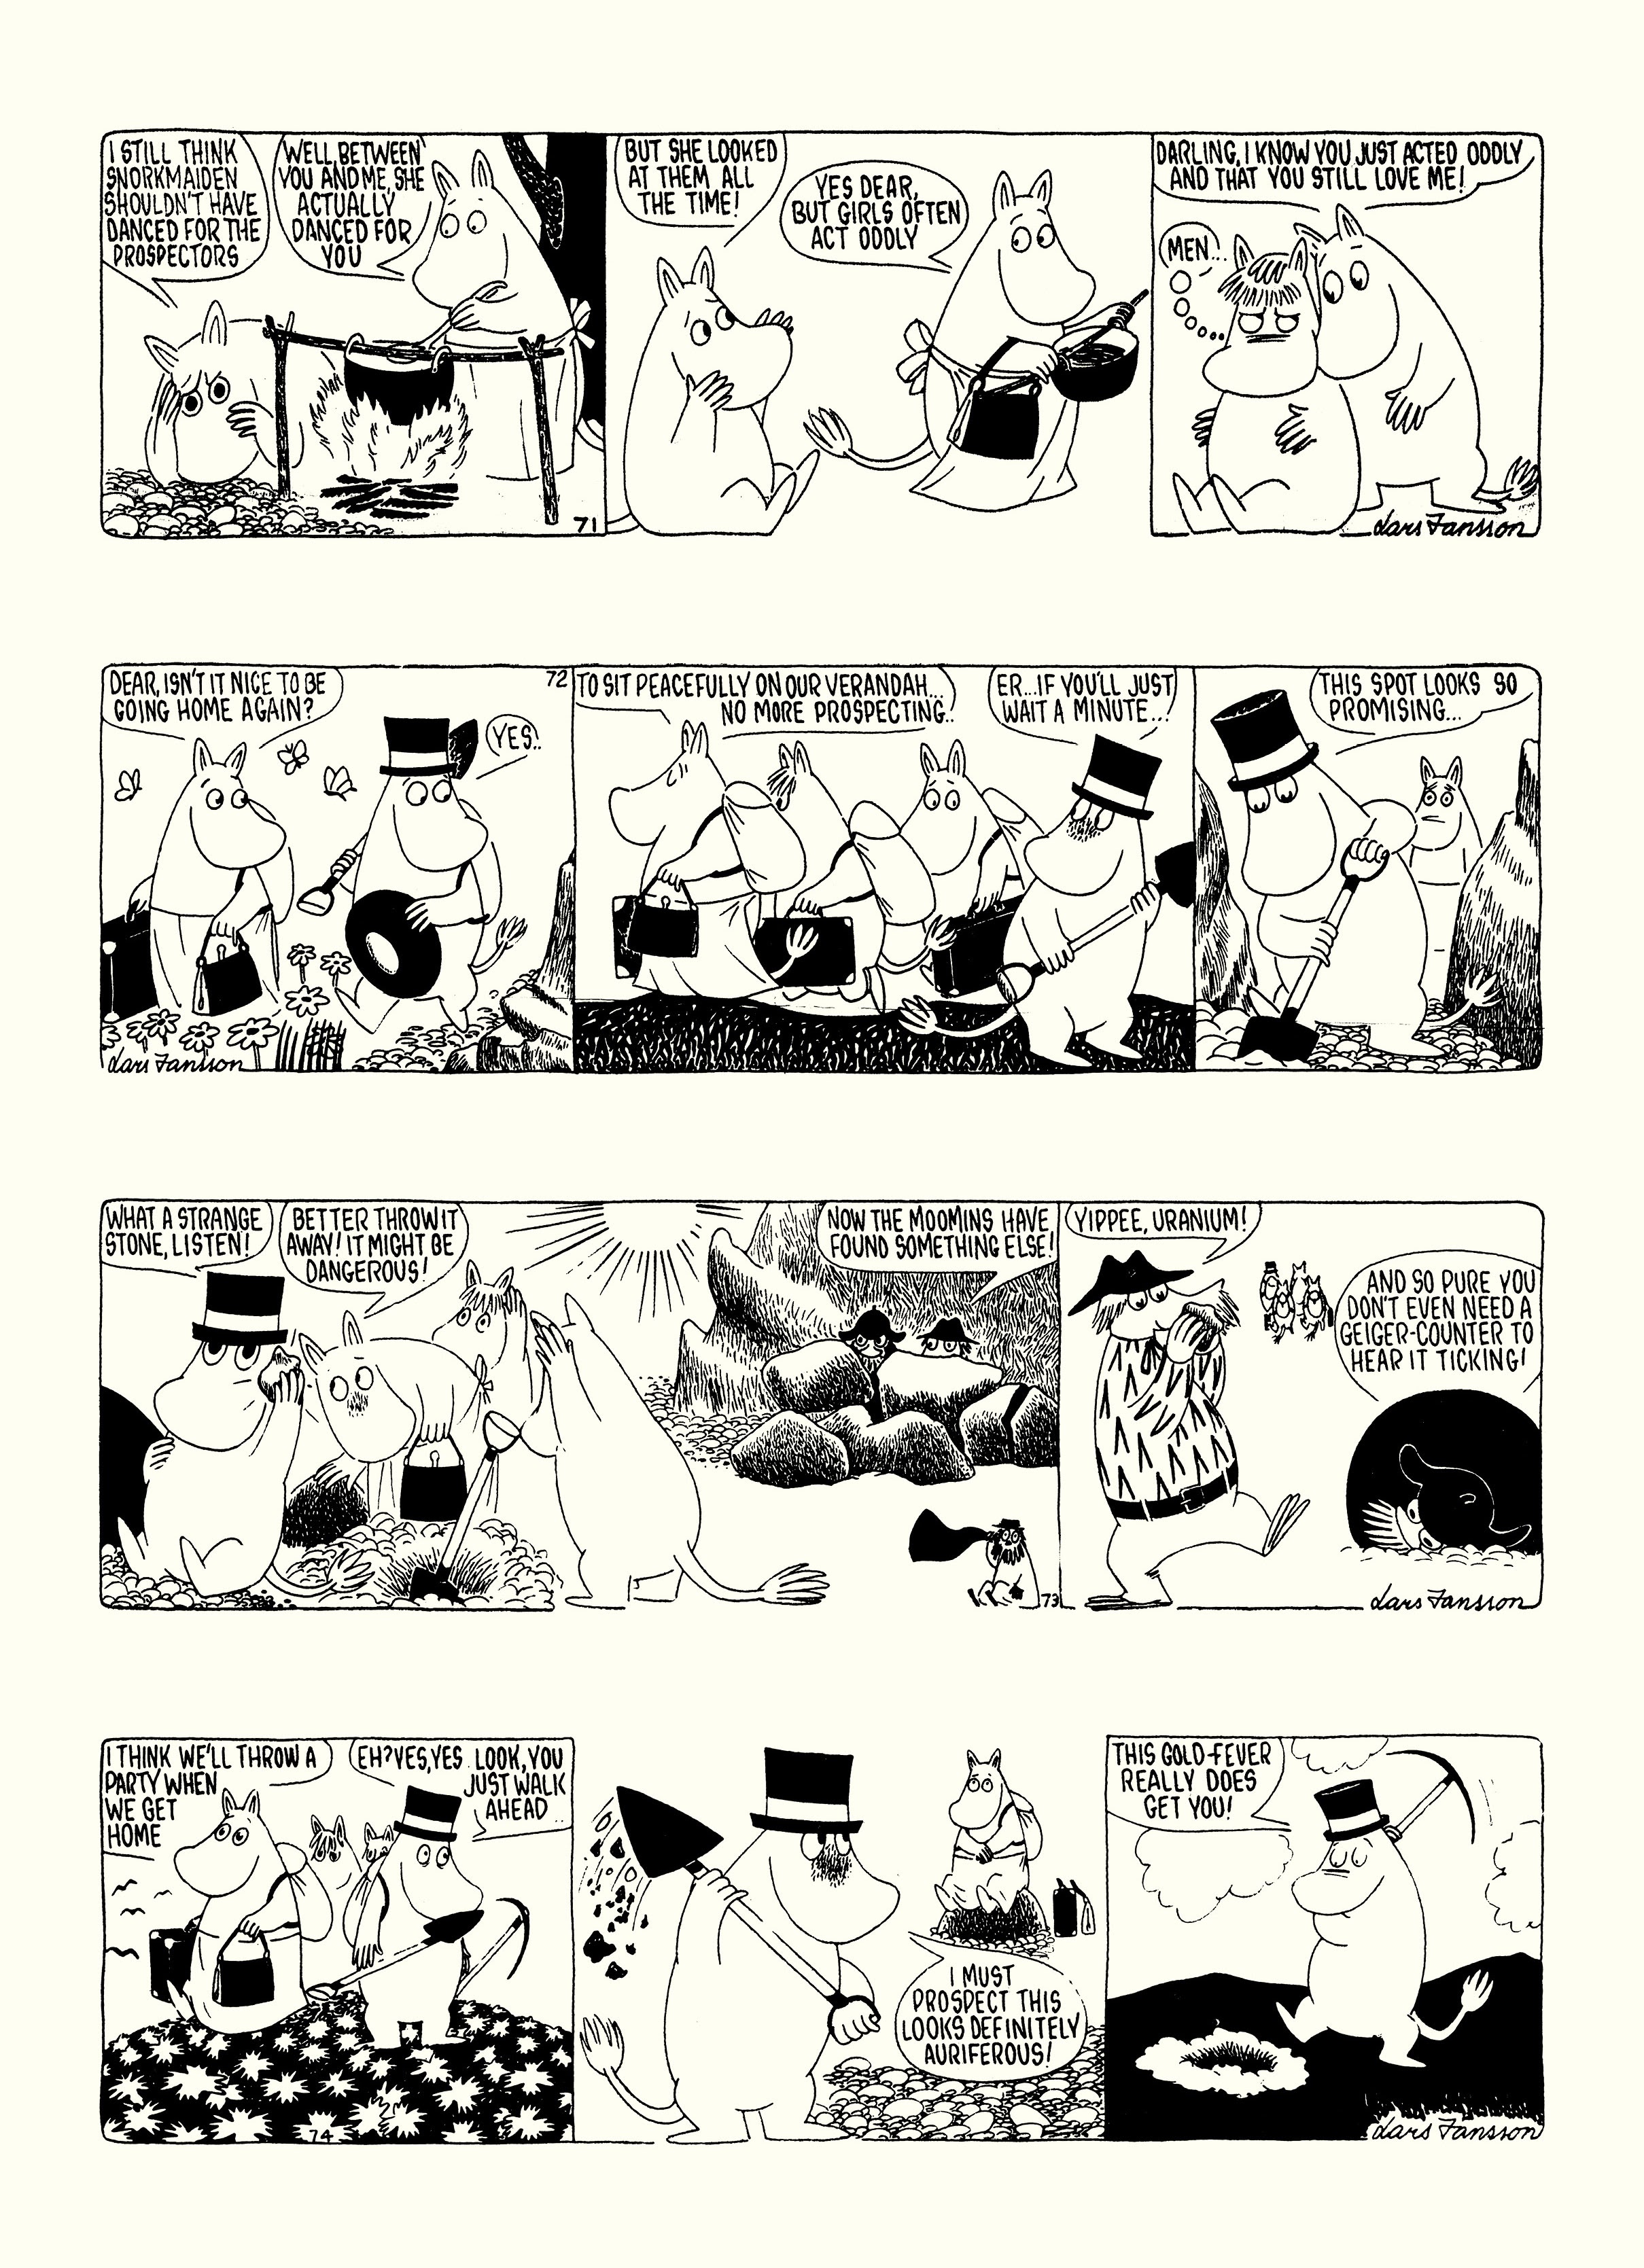 Read online Moomin: The Complete Lars Jansson Comic Strip comic -  Issue # TPB 7 - 87